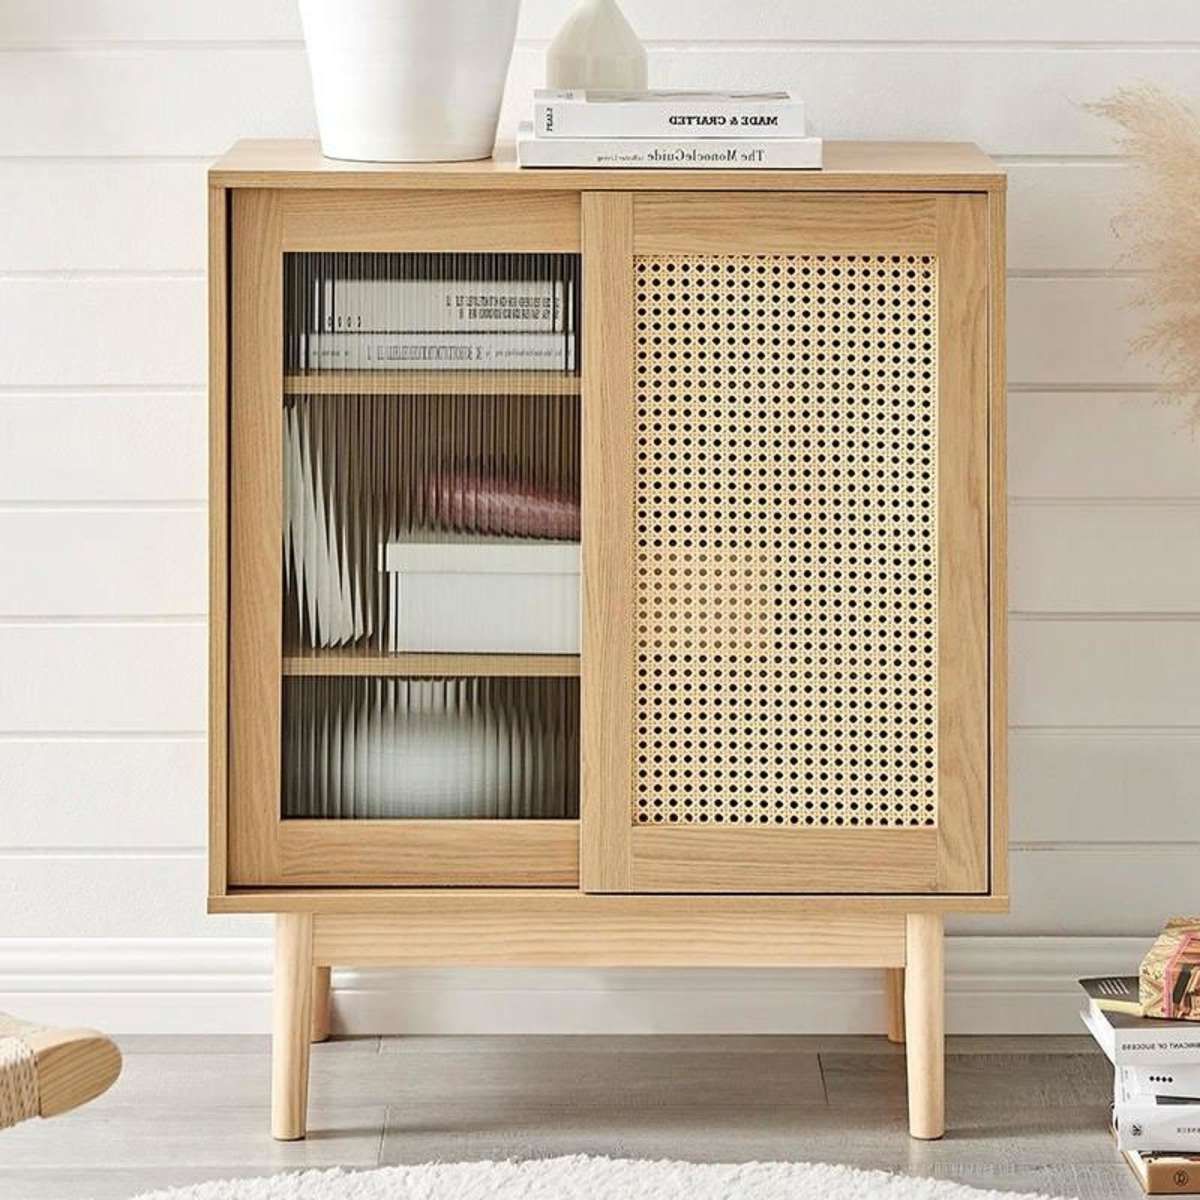 Furnic Rattan Buffet Sideboard Cabinet (natural) 1ea | Woolworths Inside Assembled Rattan Buffet Sideboards (Gallery 2 of 20)